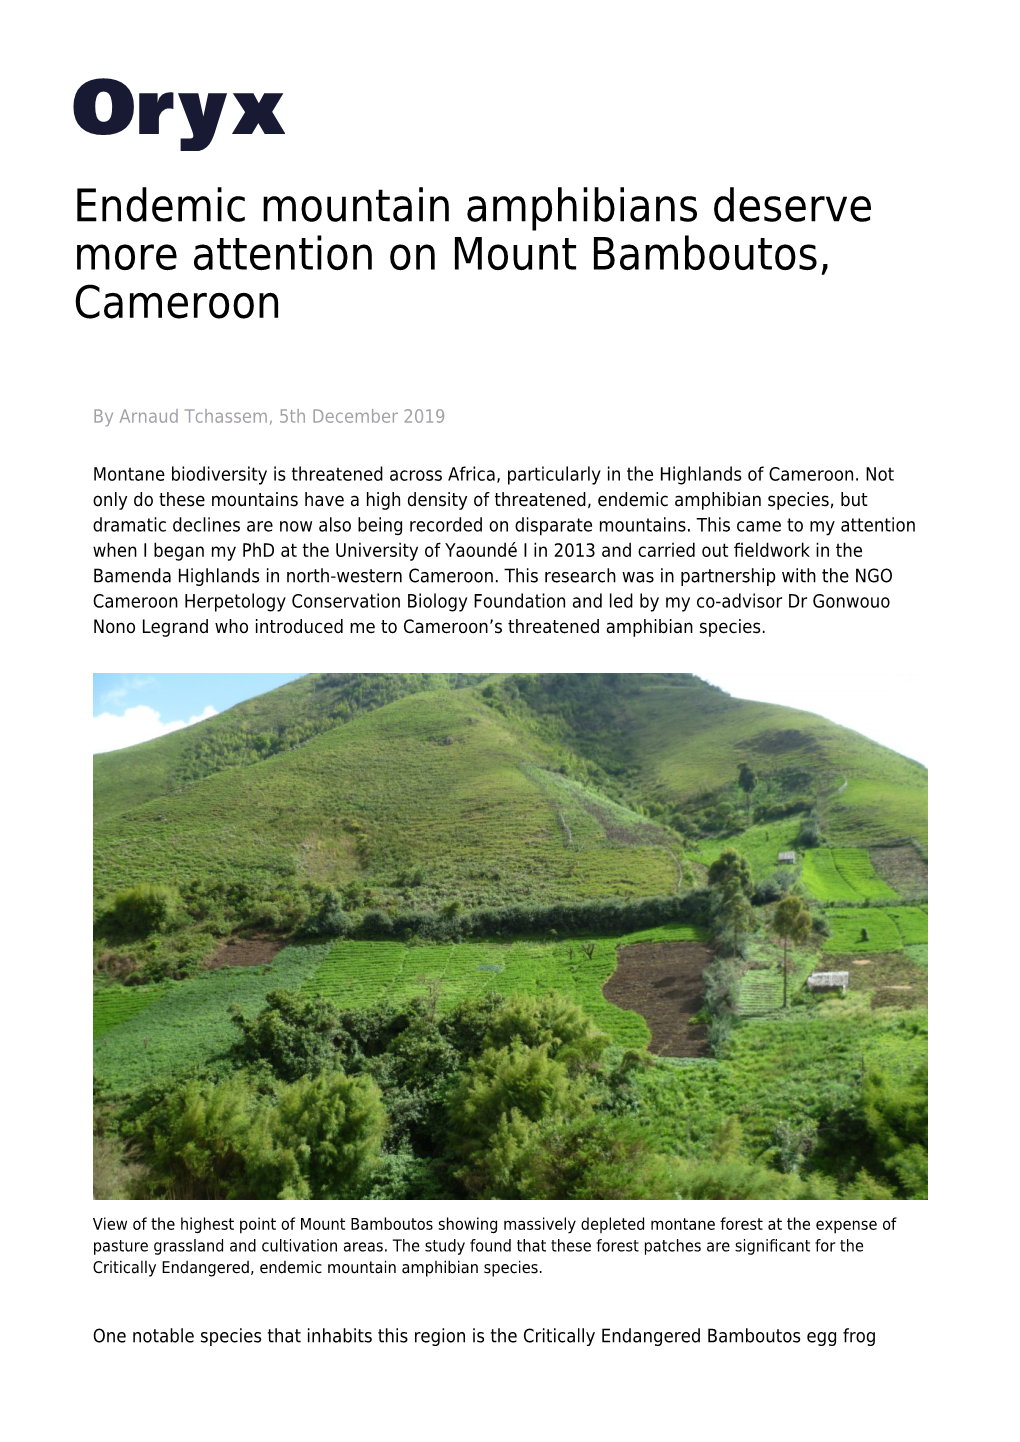 Endemic Mountain Amphibians Deserve More Attention on Mount Bamboutos, Cameroon